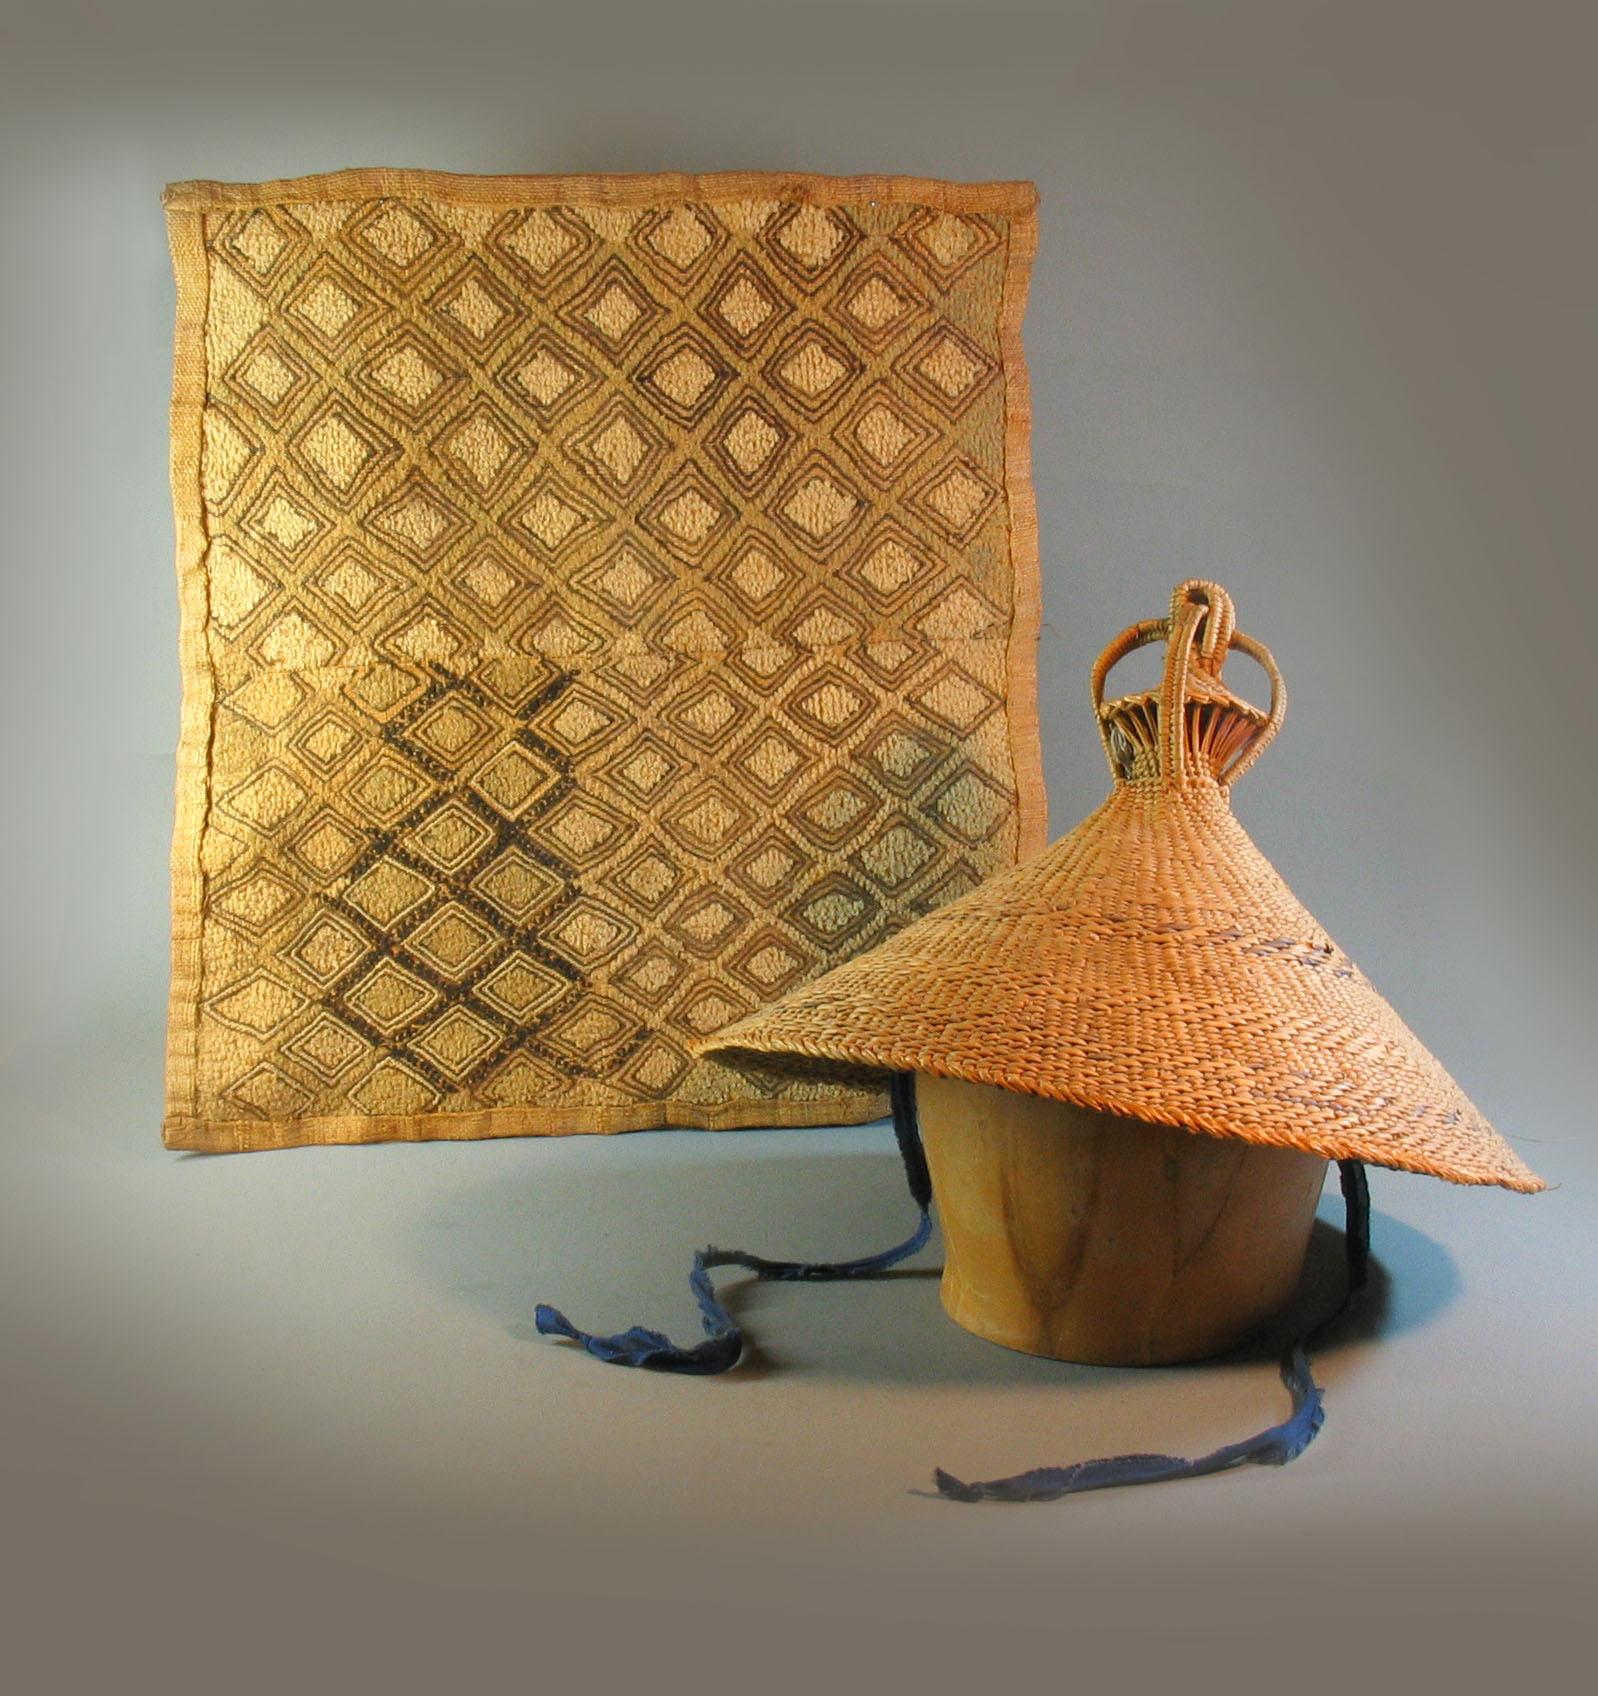 Kuba Ceremonial Raffia Textile Panel with a Hat from Lesotho Tribal Art Drc For Sale 1